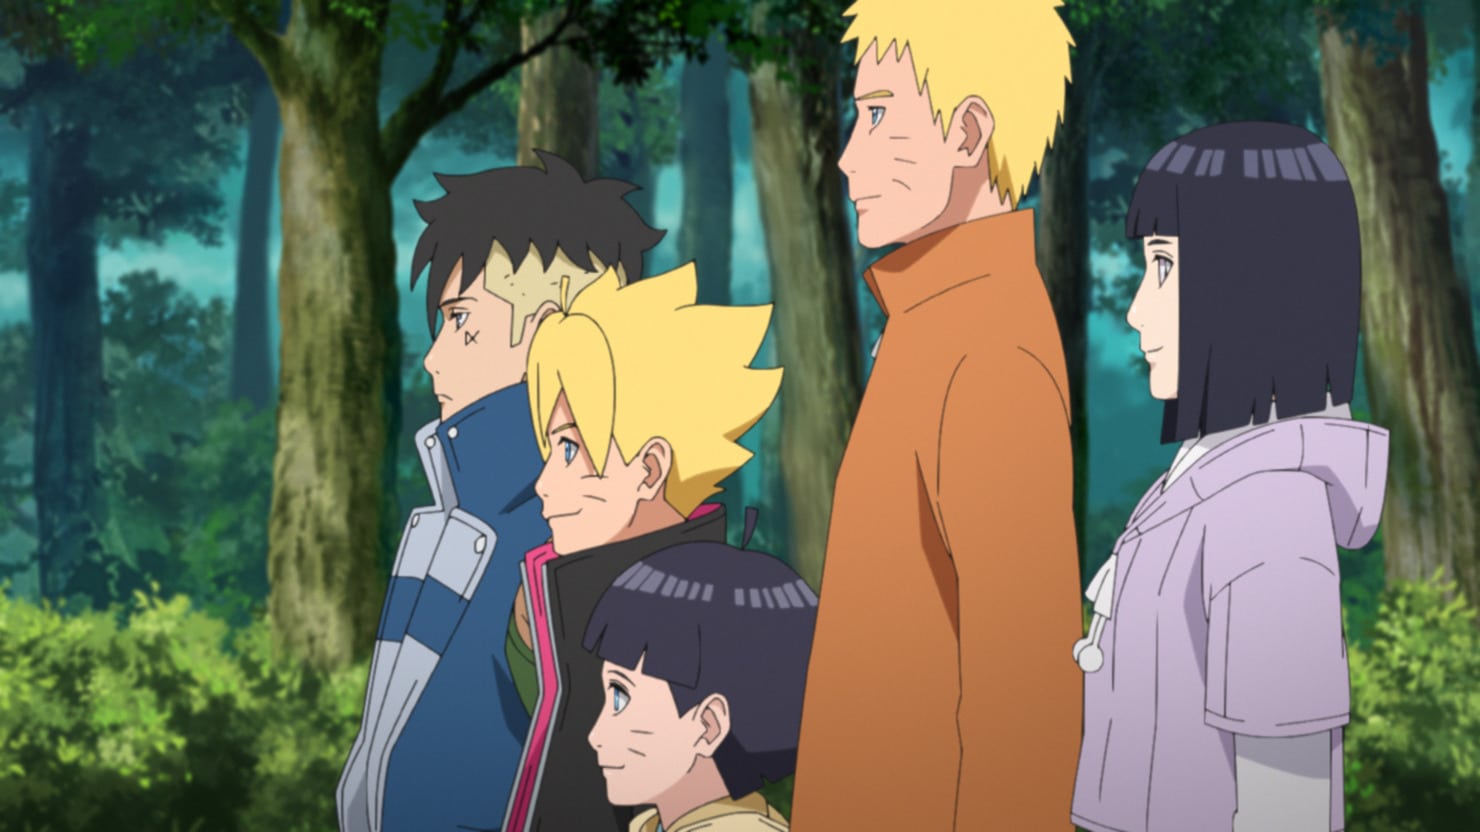 Will there be a Boruto: Naruto Next Generations part 2?